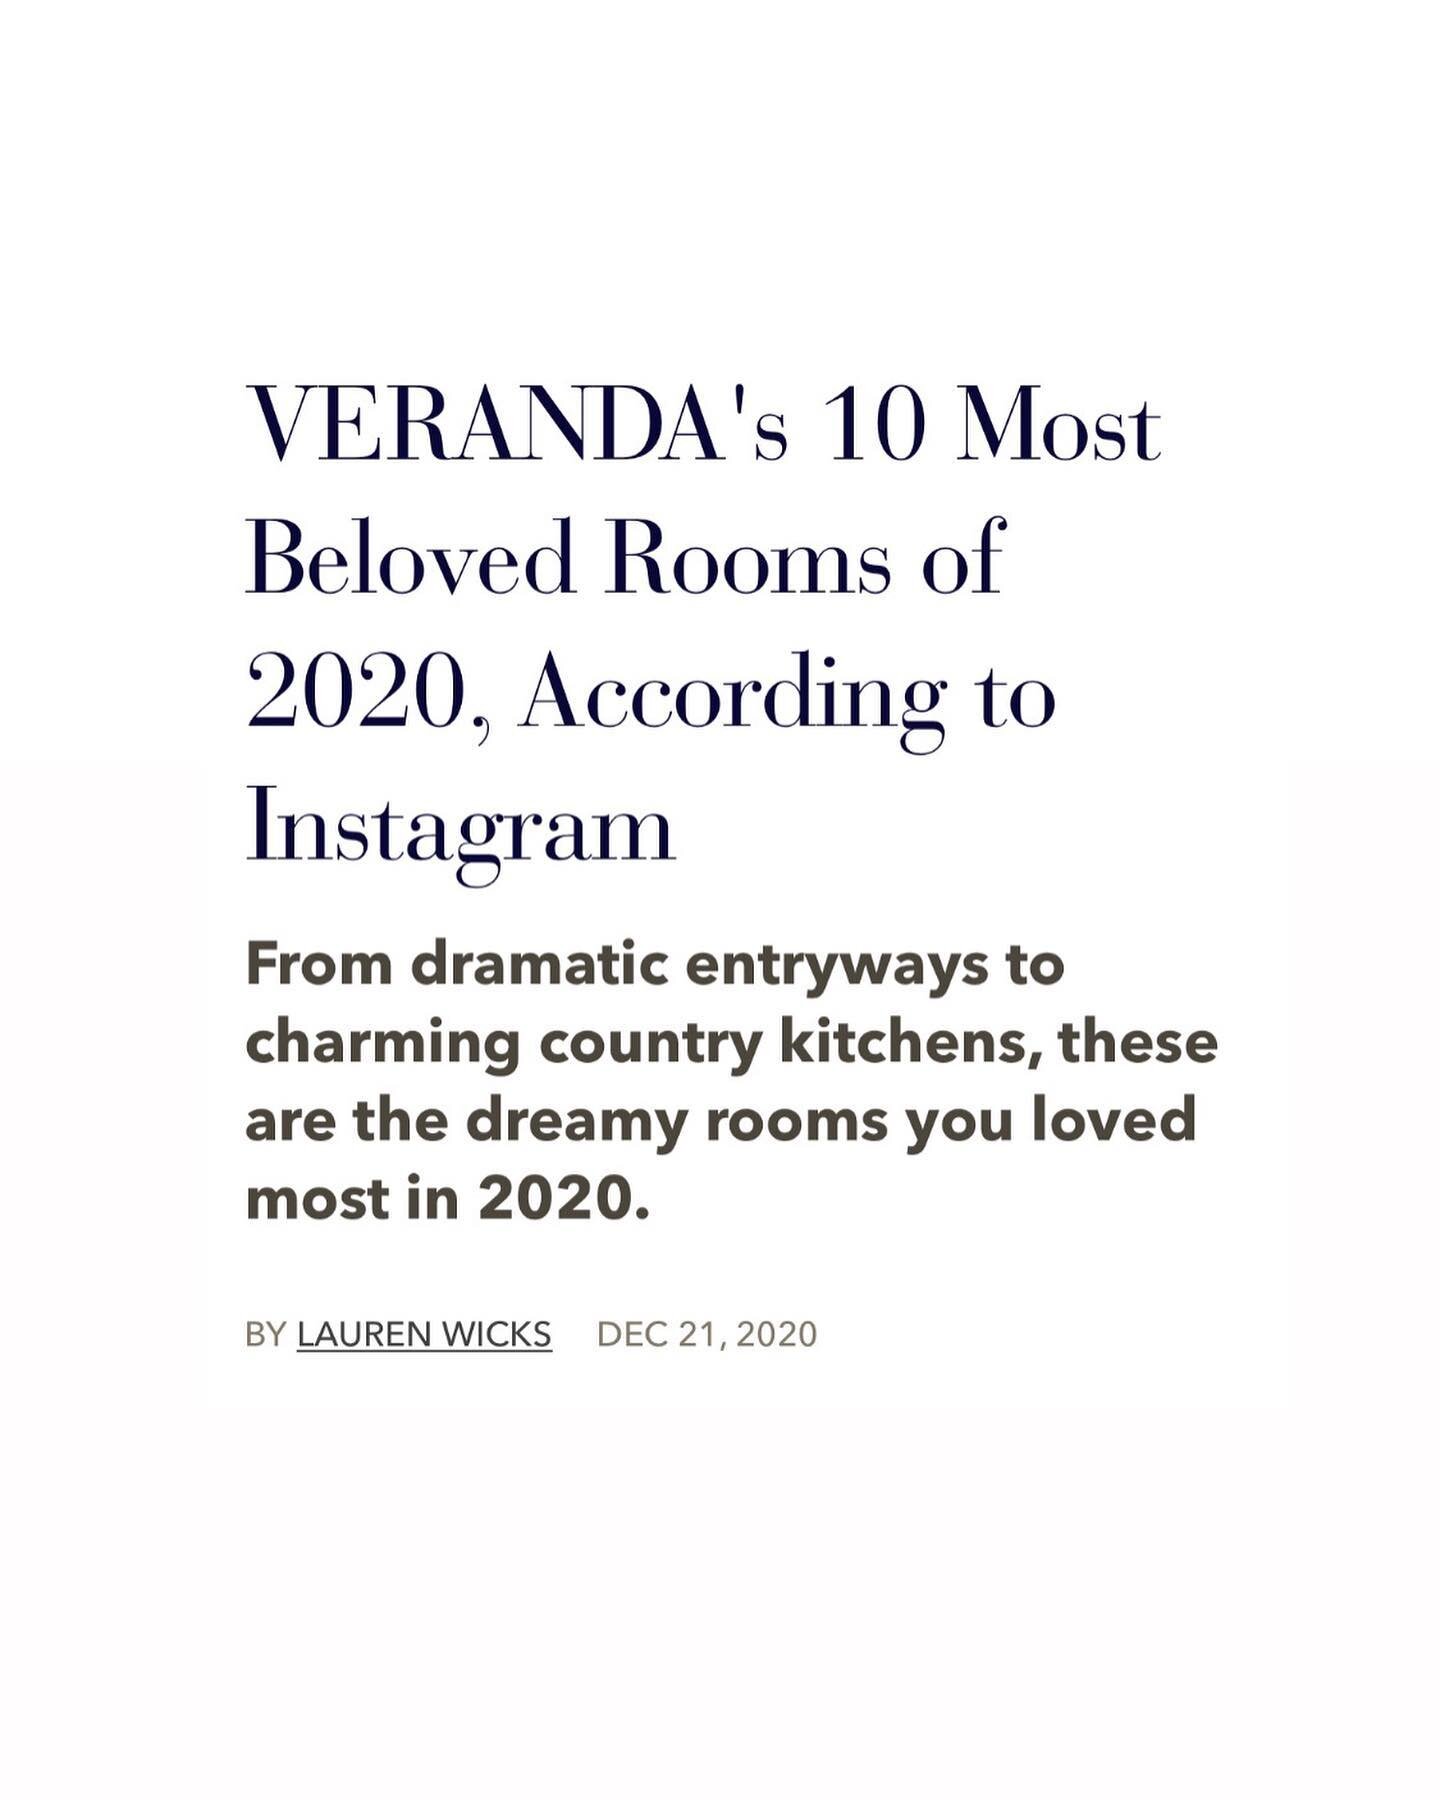 Veranda&rsquo;s most loved room on 2020 according to Instagram. We&rsquo;re ecstatic! Wishing everyone a Happy and Healthy New Year. 

Thank you @verandamag for the continued coverage on this beautiful kitchen. We are honored to be a part of the work